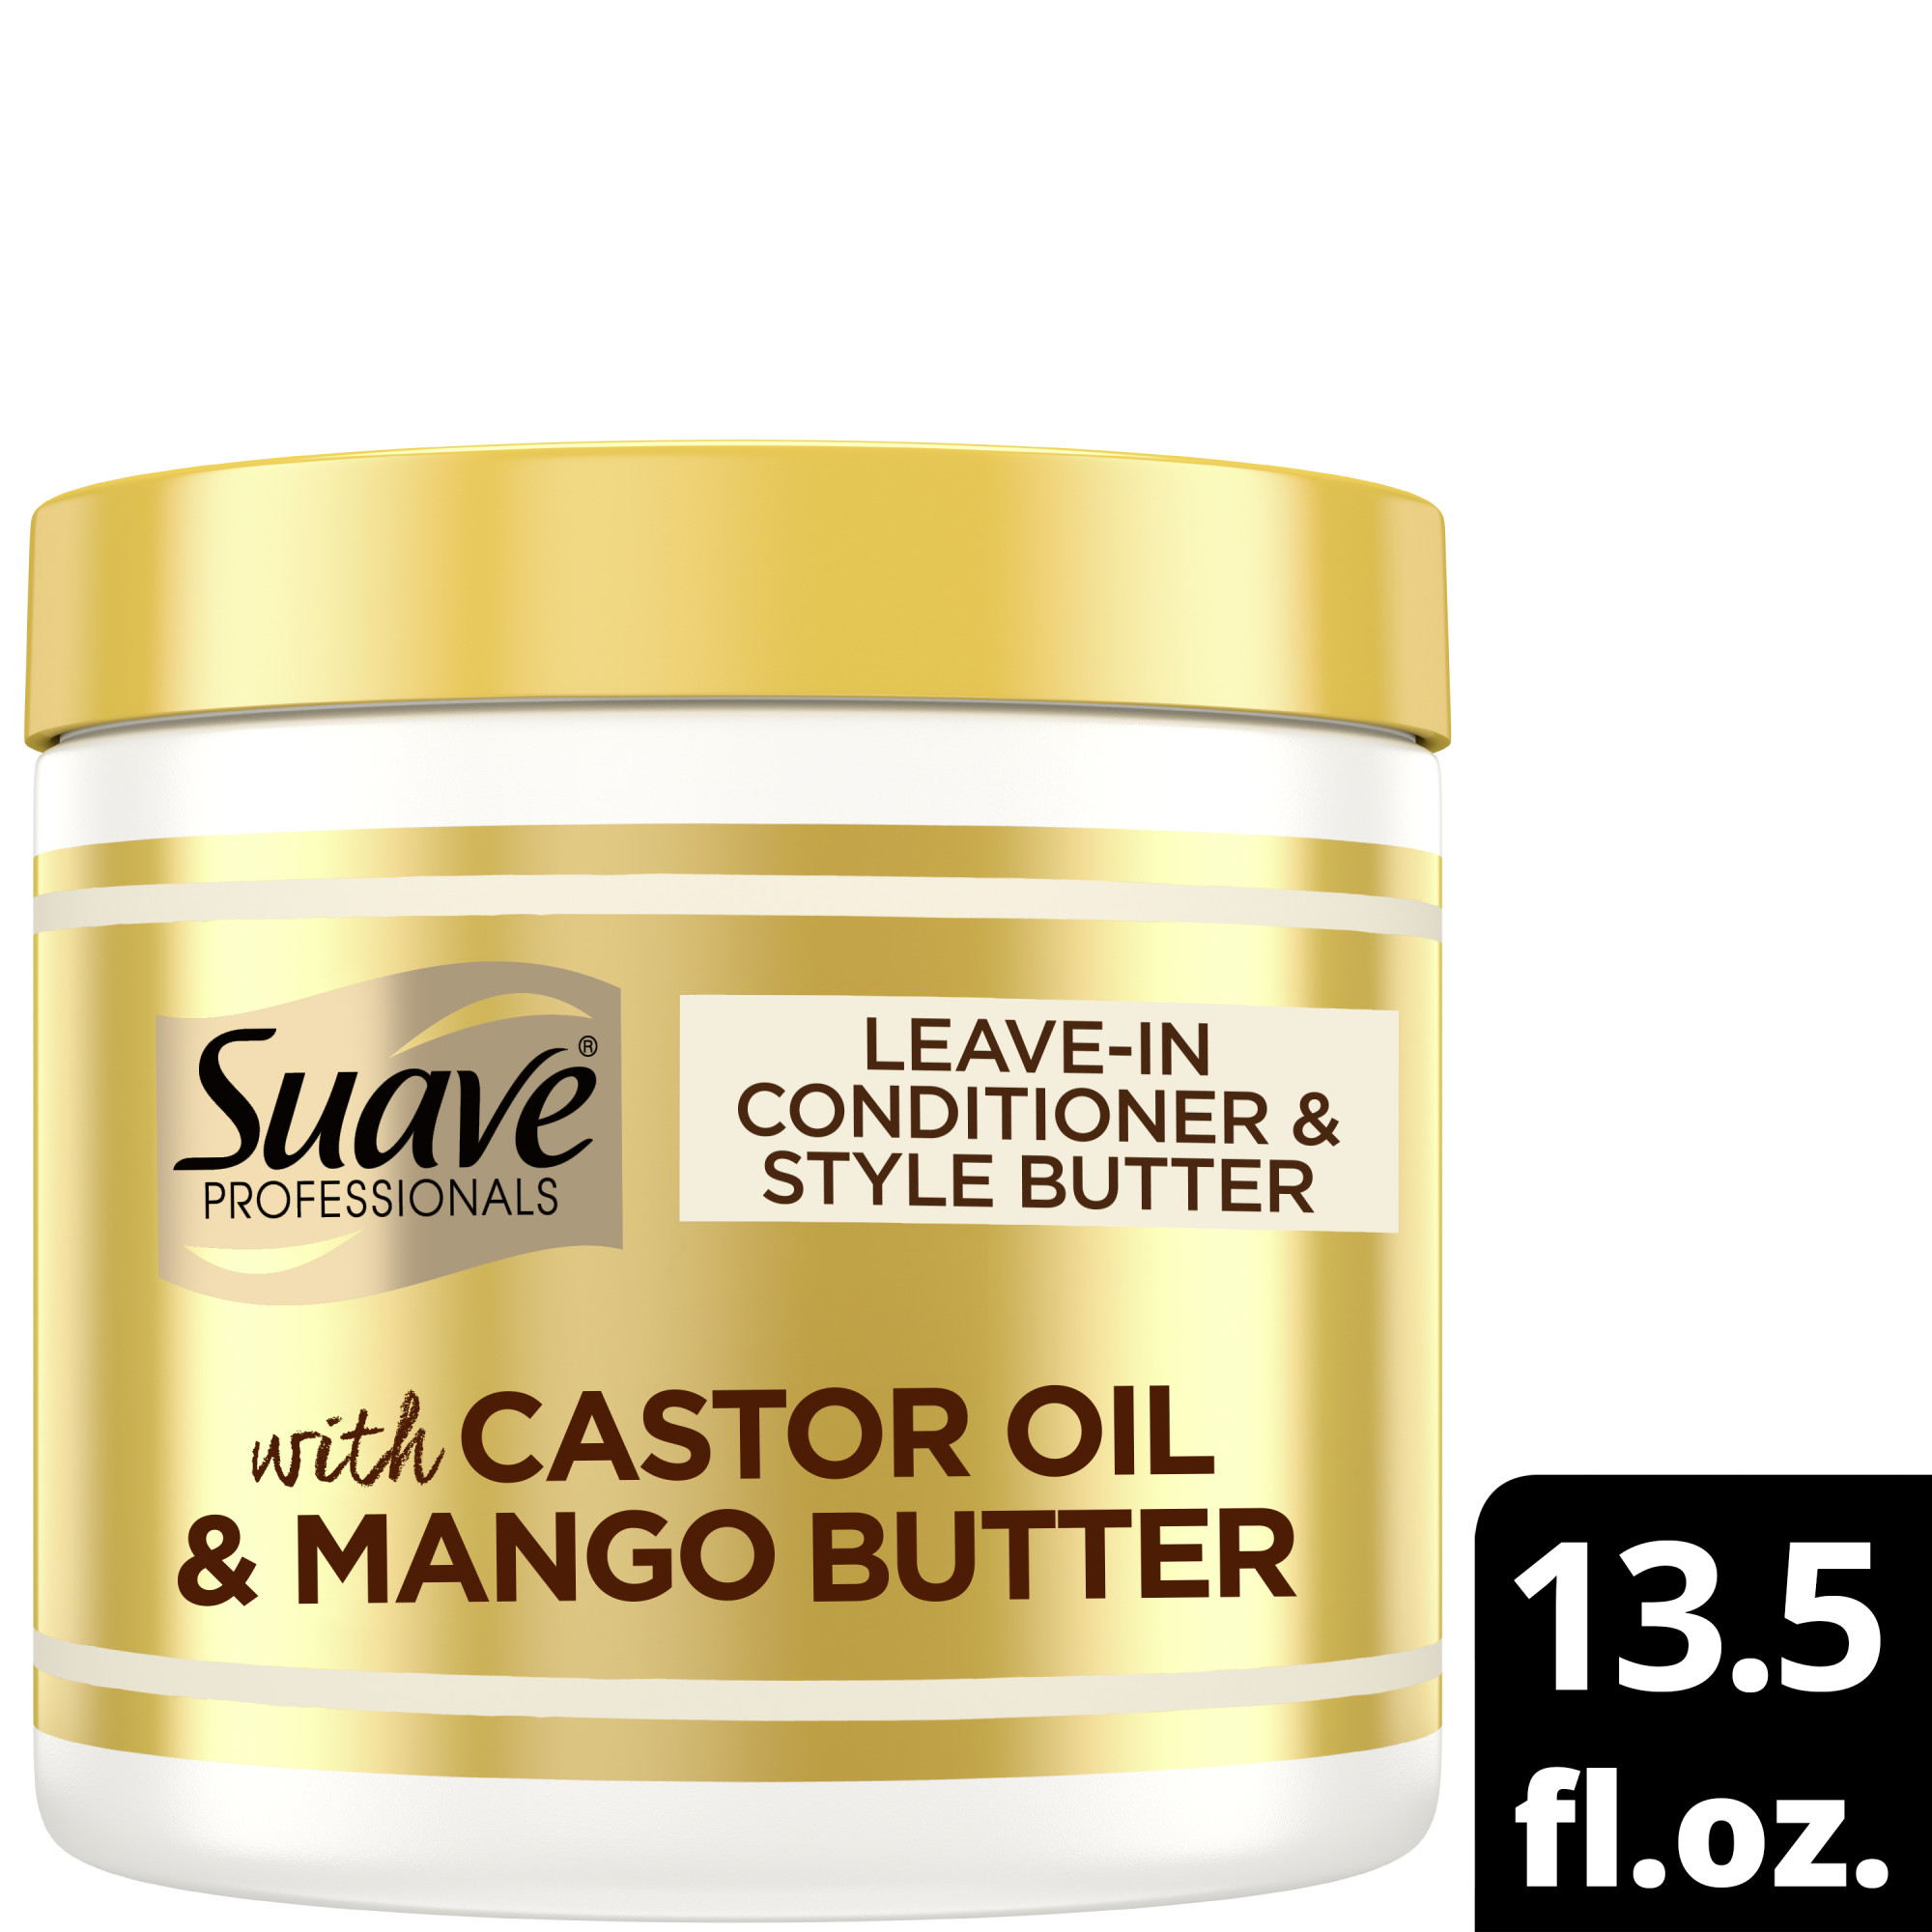 Suave Professionals Moisturizing Thickening Daily Conditioner with Castor Oil & Mango Butter, 13.5 fl oz - image 1 of 6